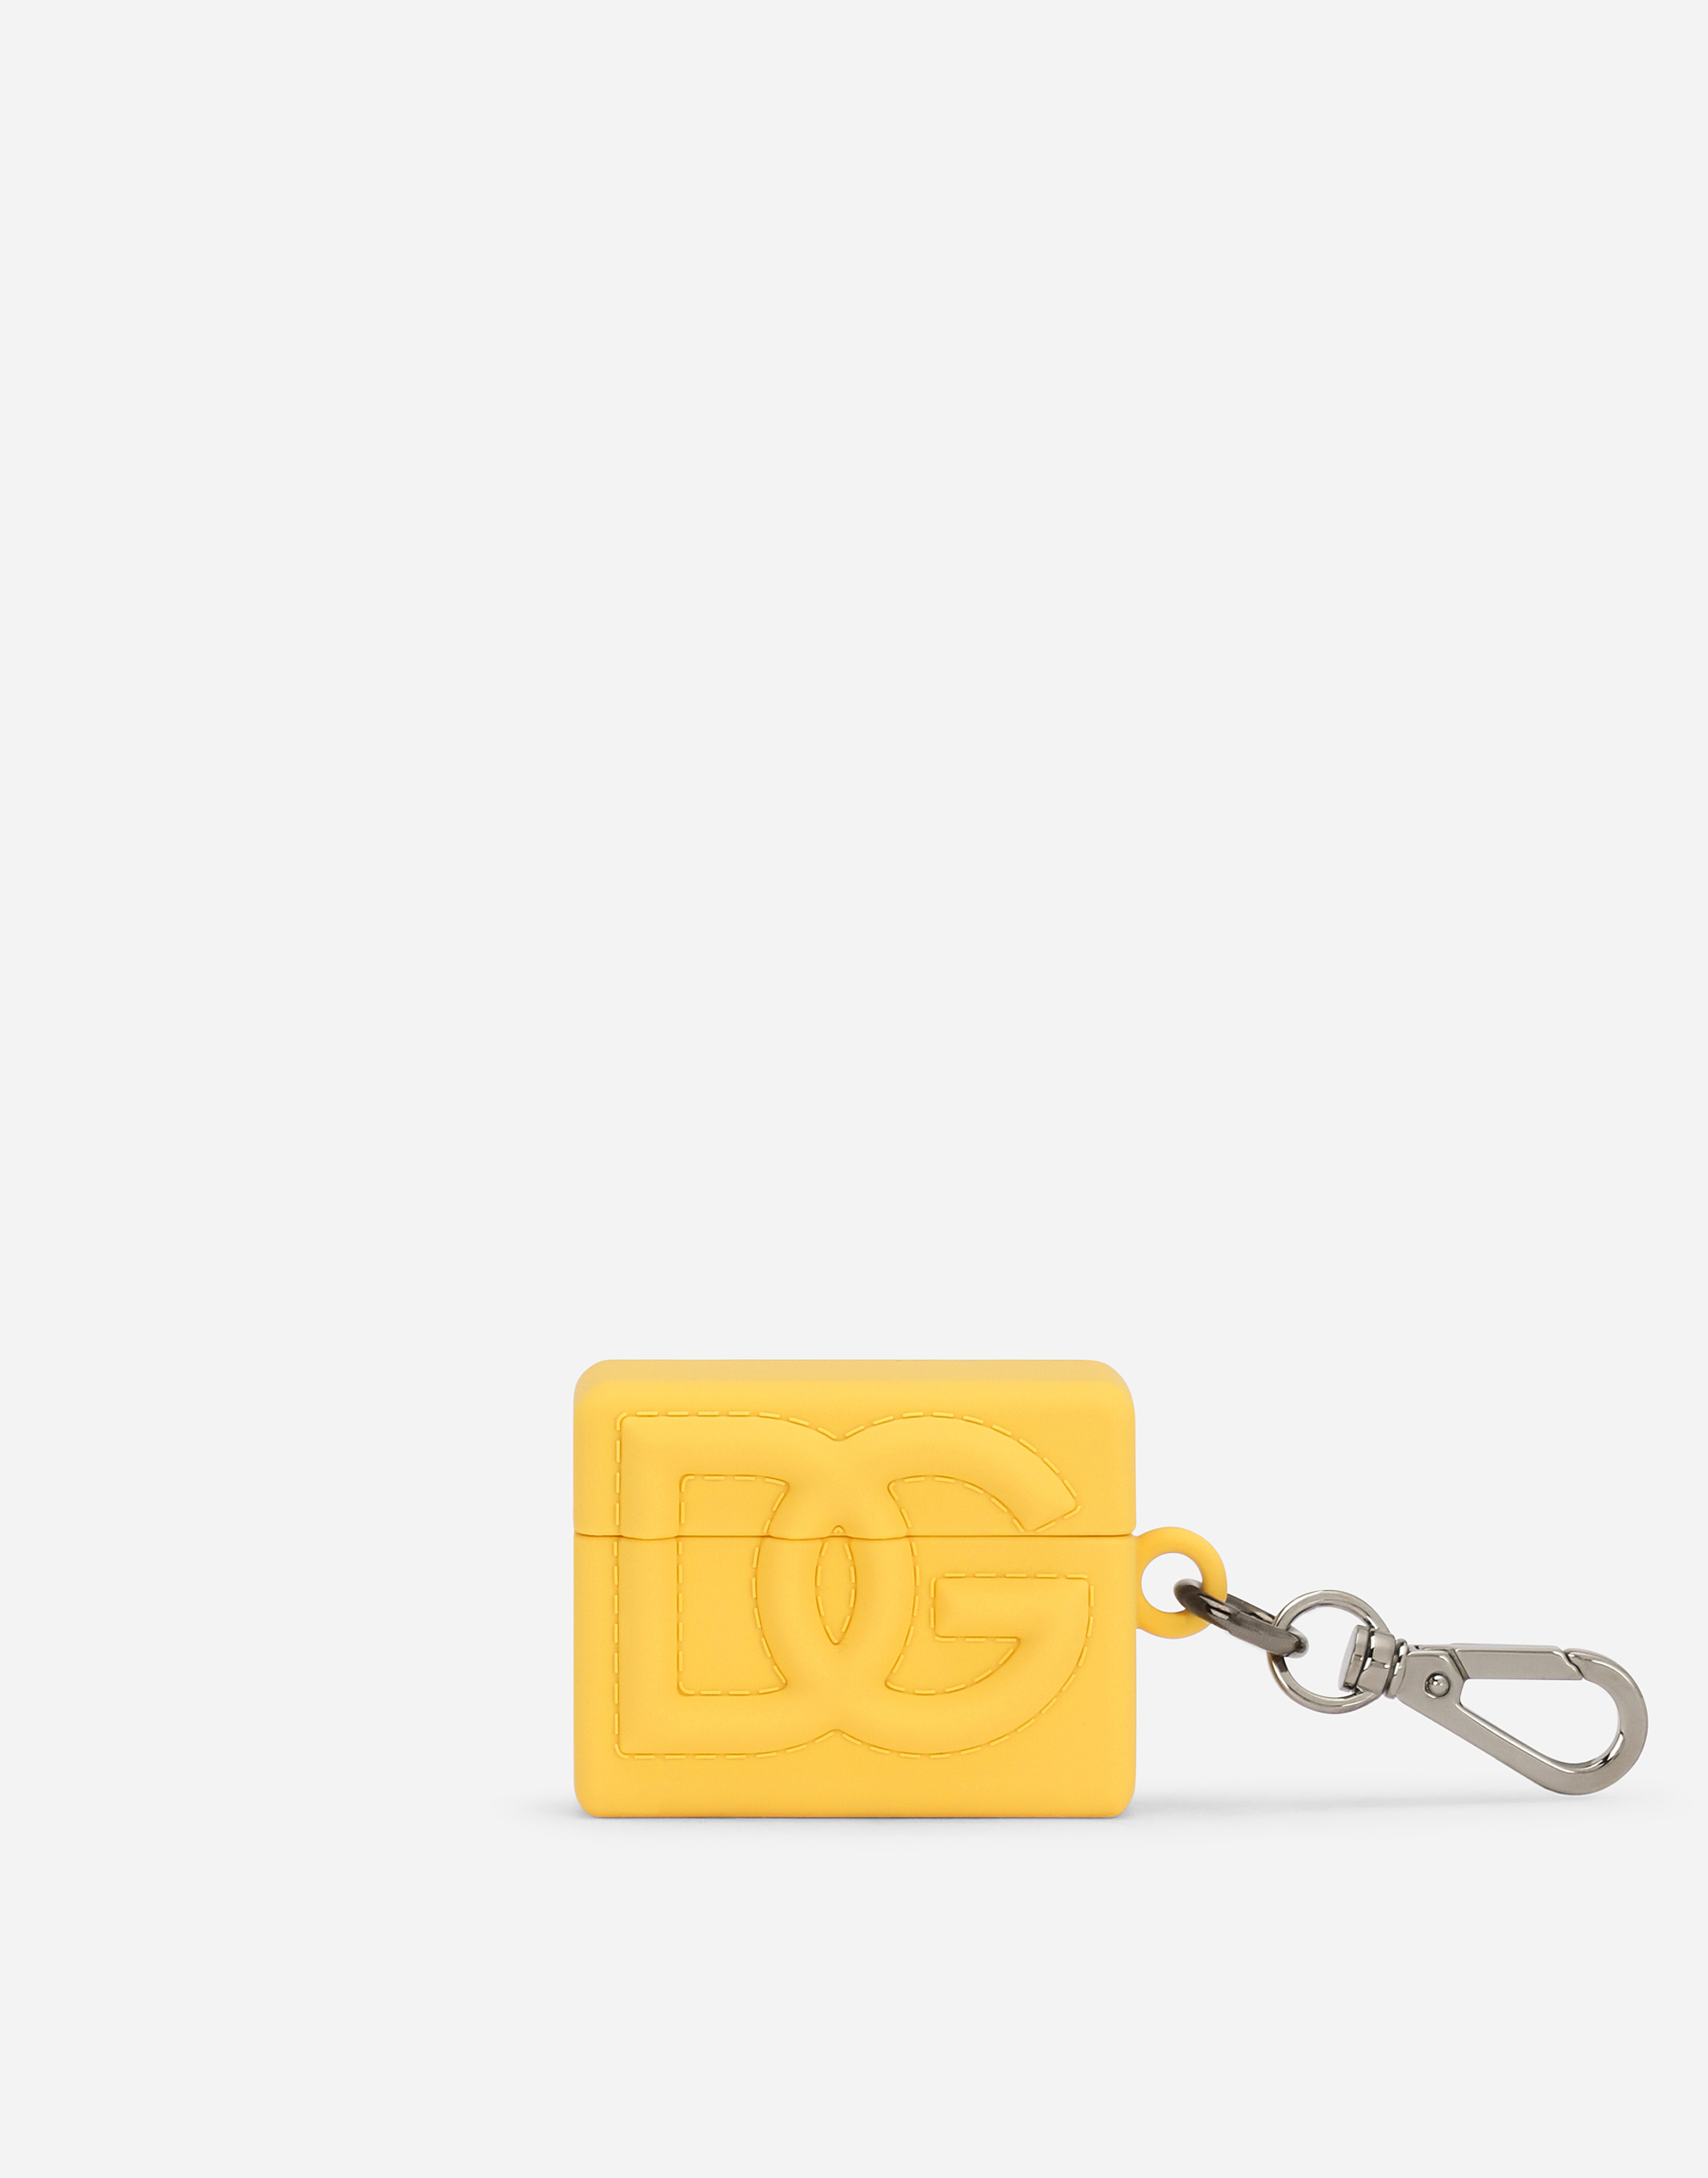 Rubber AirPods case in Yellow